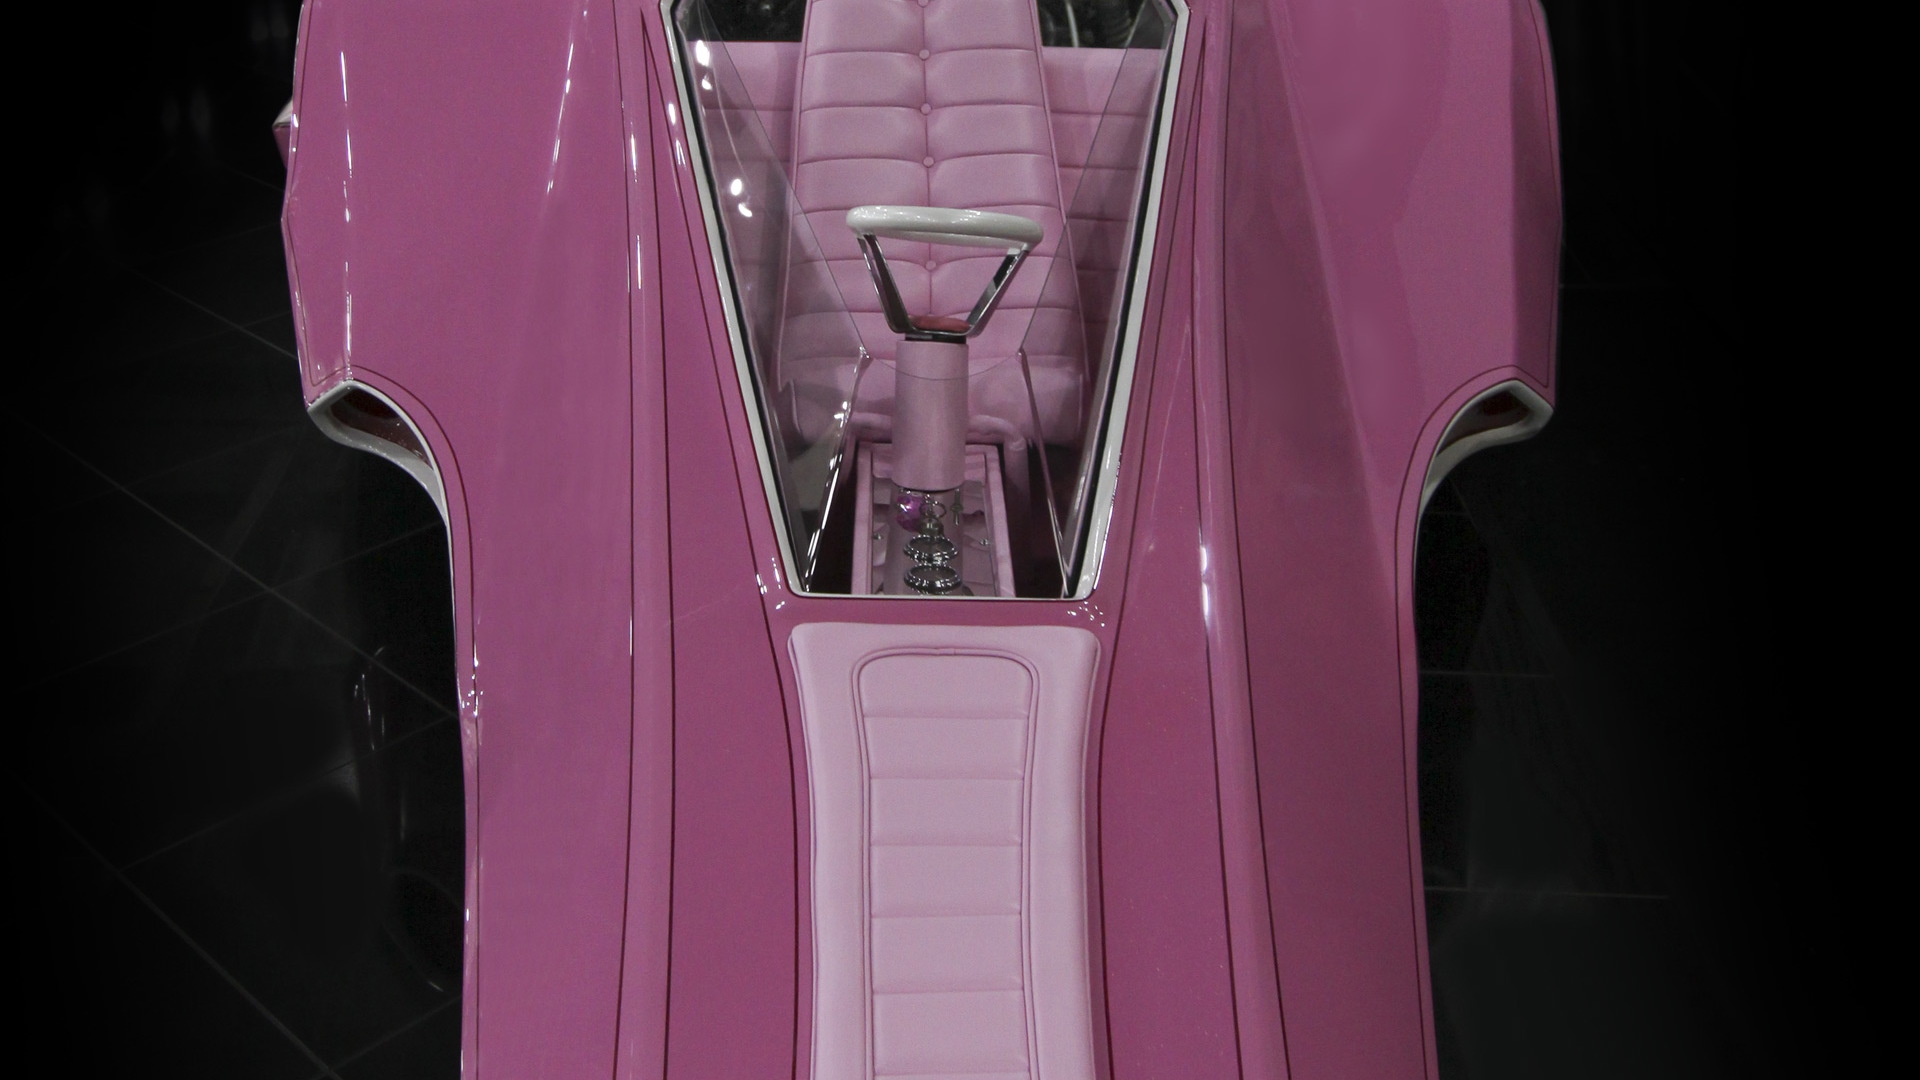 Panthermobile built for ‘Pink Panther Show’ restored by Galpin Restorations